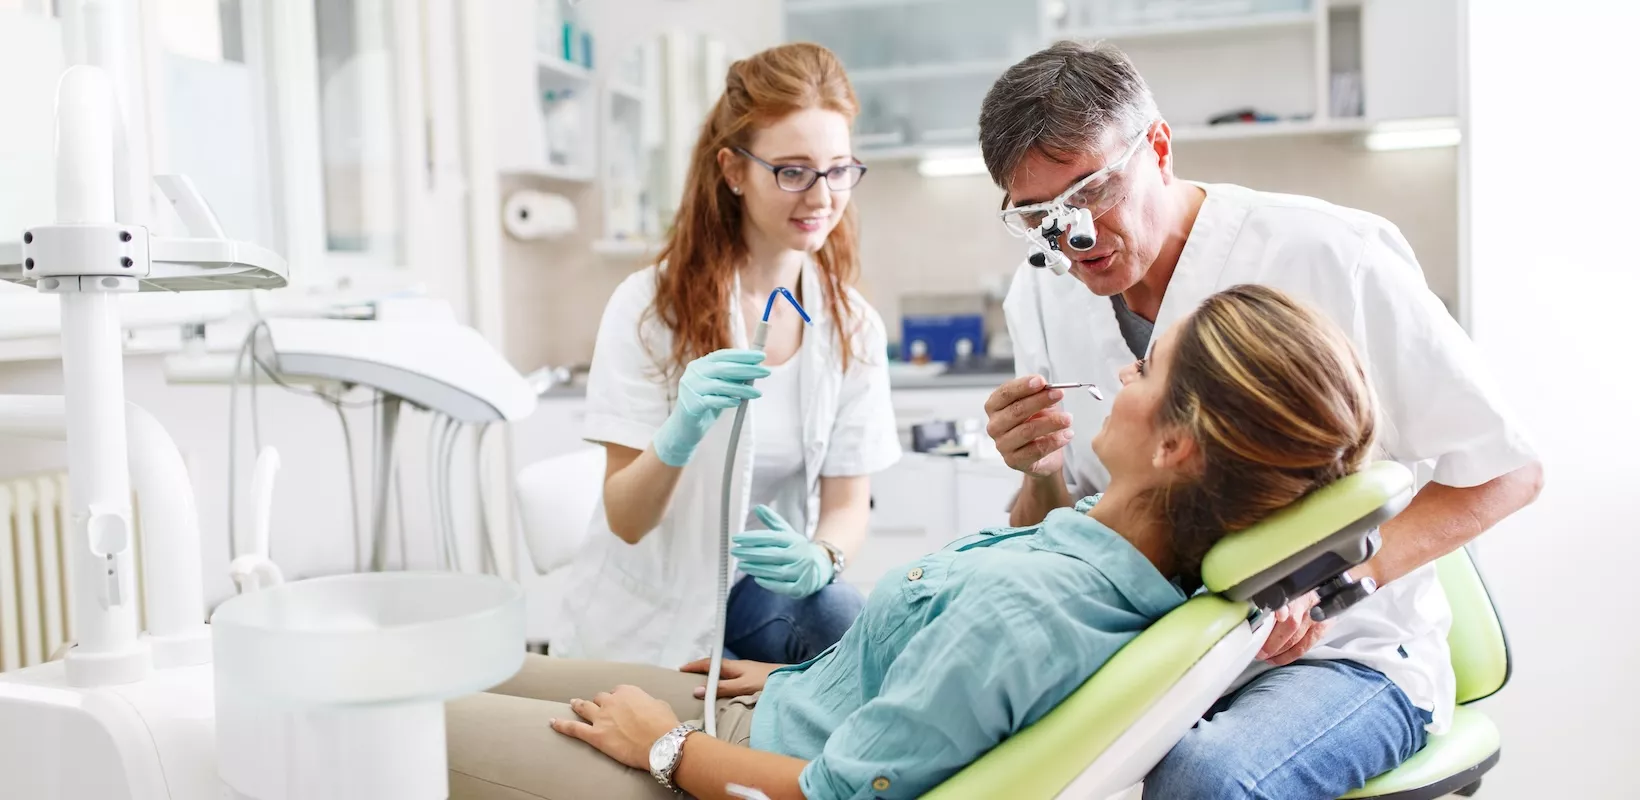 periodontal maintenance featured image of a patient in a dental exam chair